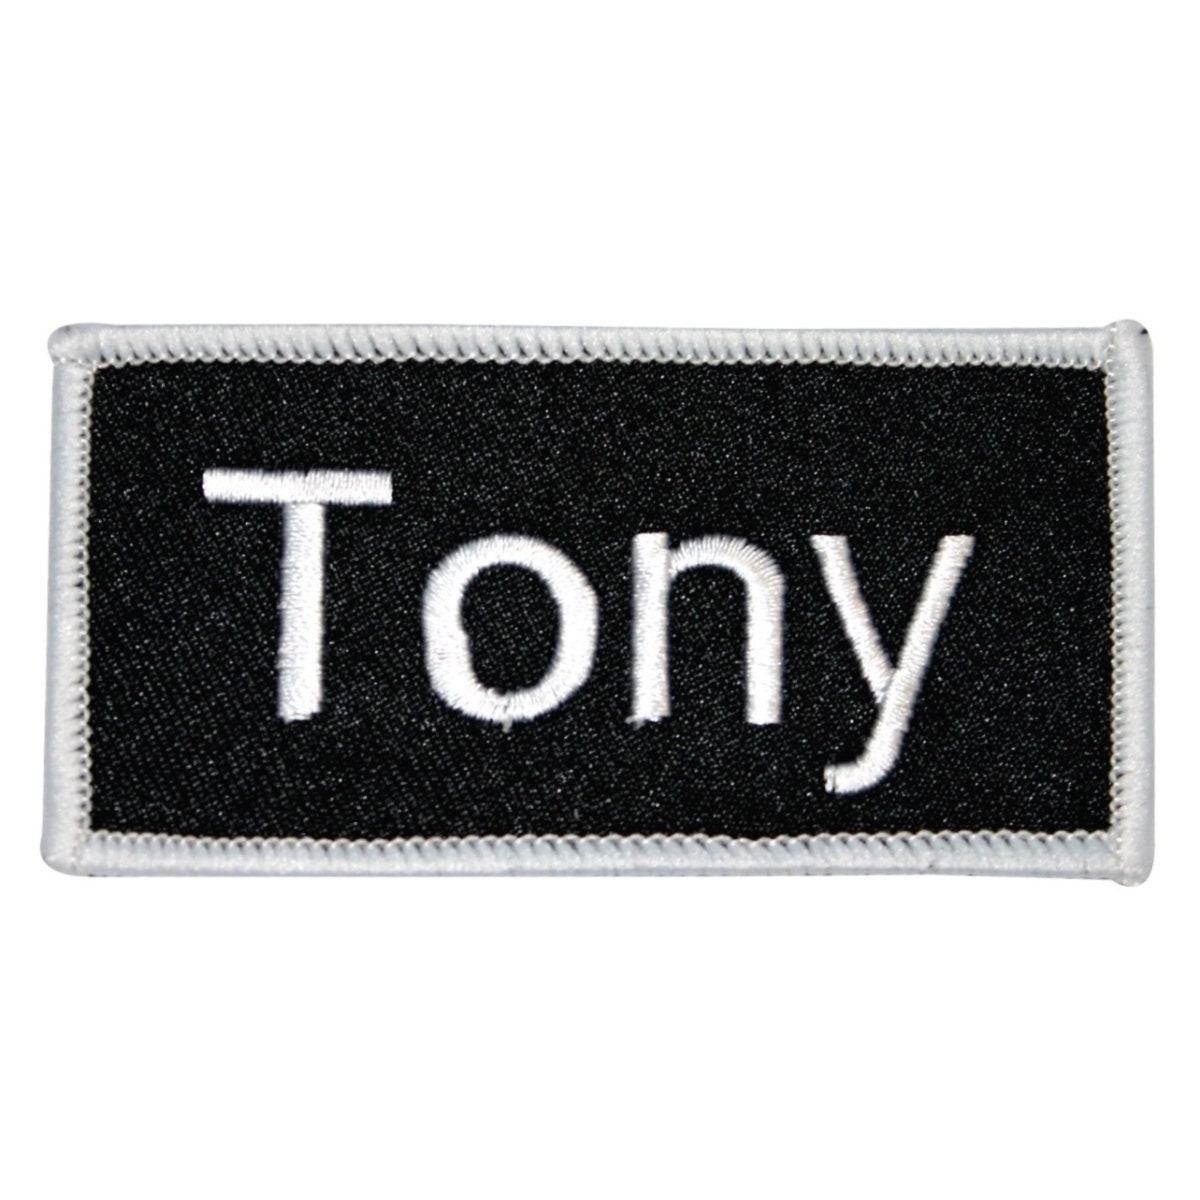 Custom Name Patch, Personalized Name Patch, Embroidered Text Patch, Iron on  Name Patch, Embroidered Name Patch, 5 to 12 Wide 